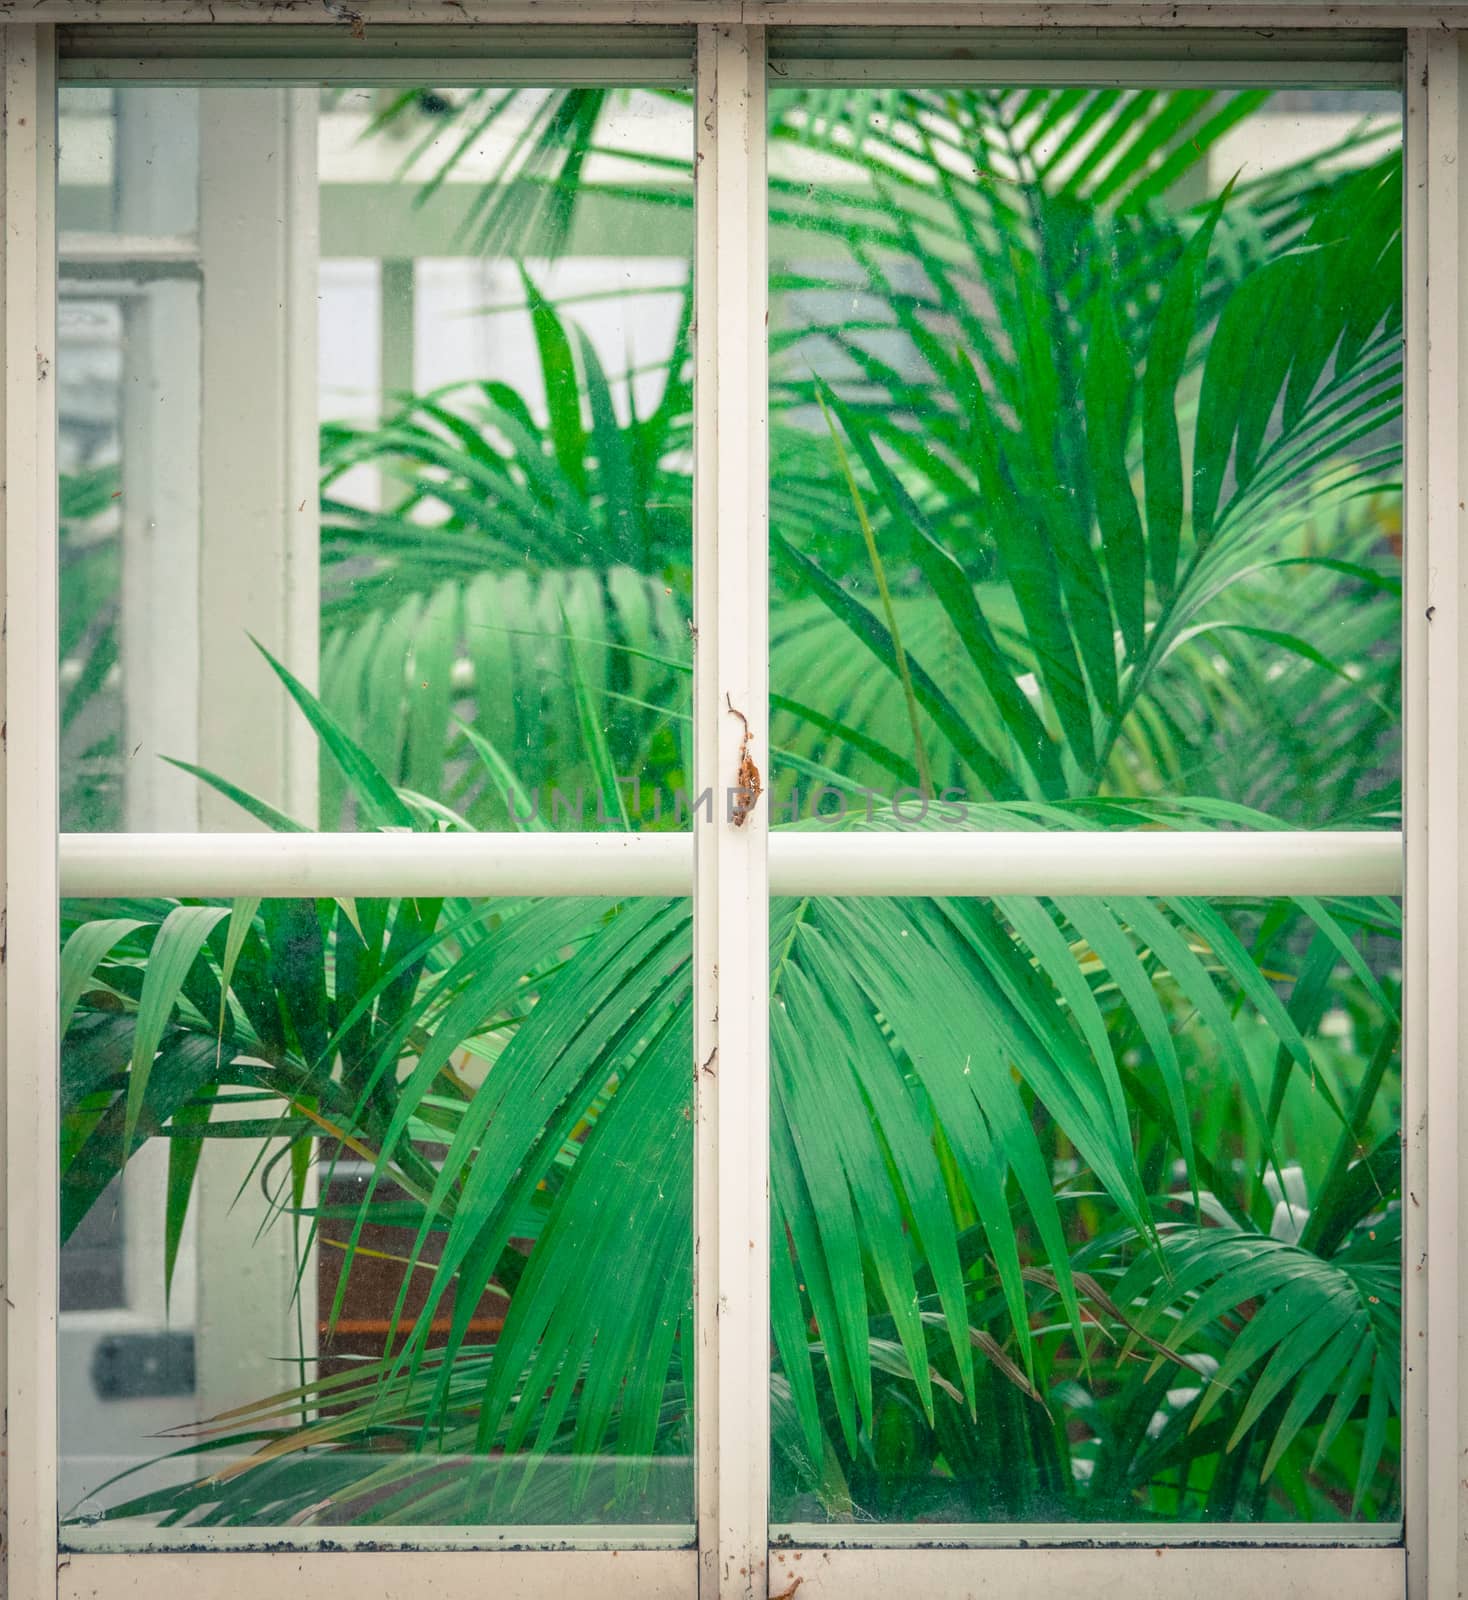 Vintage Greenhouse With Palms by mrdoomits